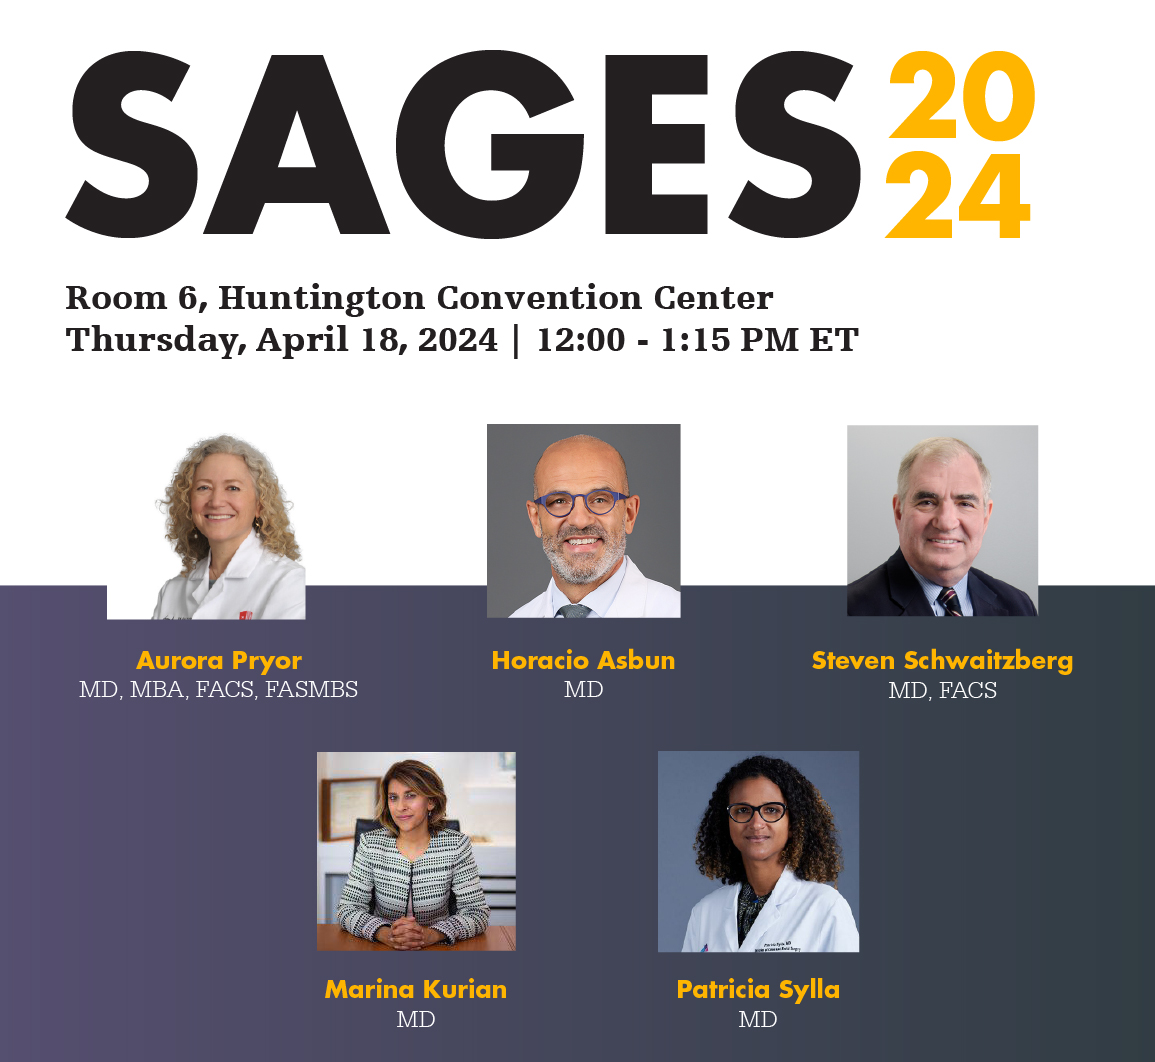 Are you attending #SAGES2024? Join us for lunch and a dynamic panel discussion on the peace of mind SPY Fluorescence Imaging technology can bring to the operating room! Please register for this luncheon at bit.ly/43TNuaO